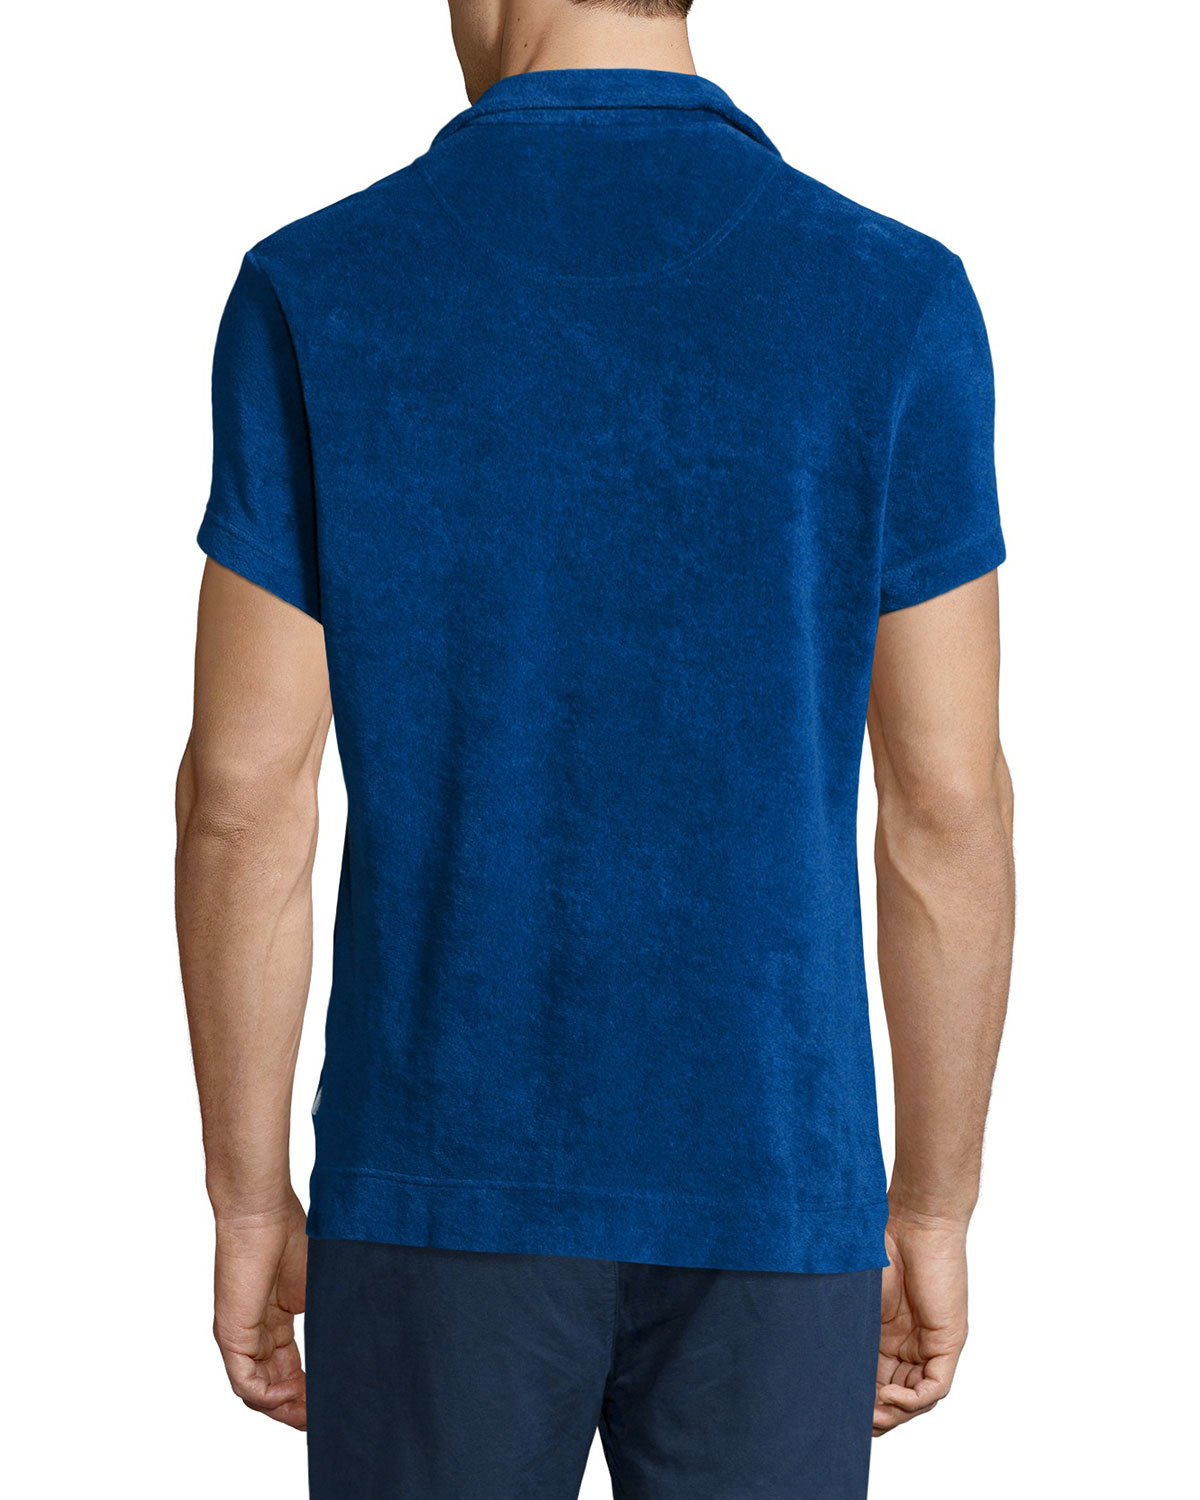 Orlebar Brown Terry Towel Short-sleeve Polo Shirt in Blue for Men - Lyst